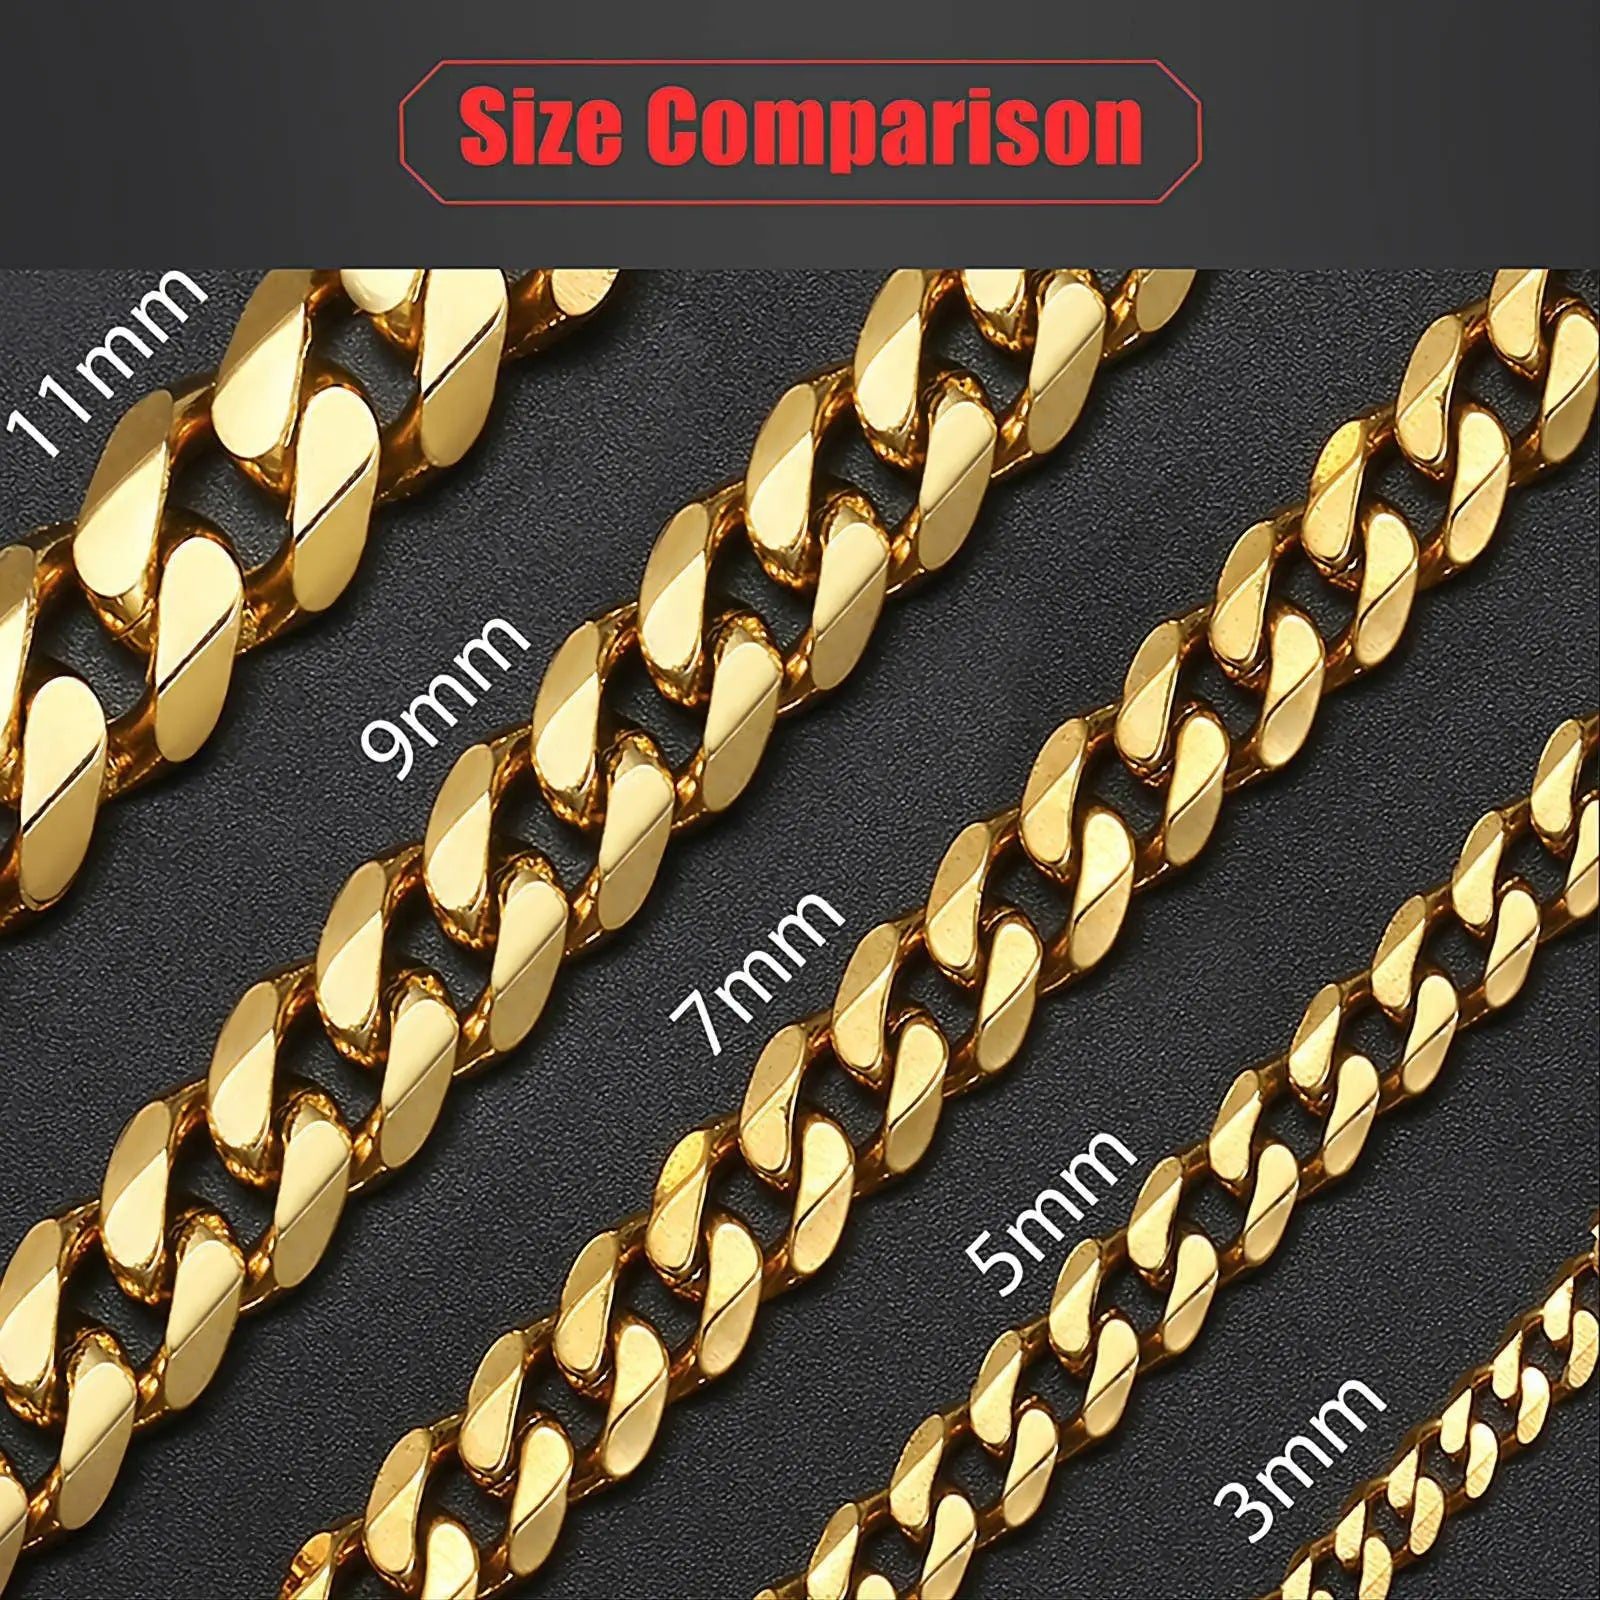 14k Gold Cuban Link Necklace, 3mm/5mm/7mm/9mm/11mm Mens Gift, Gift for Dad, Wife Husband, Stainless Steel Necklace, Gold Necklace JettsJewelers